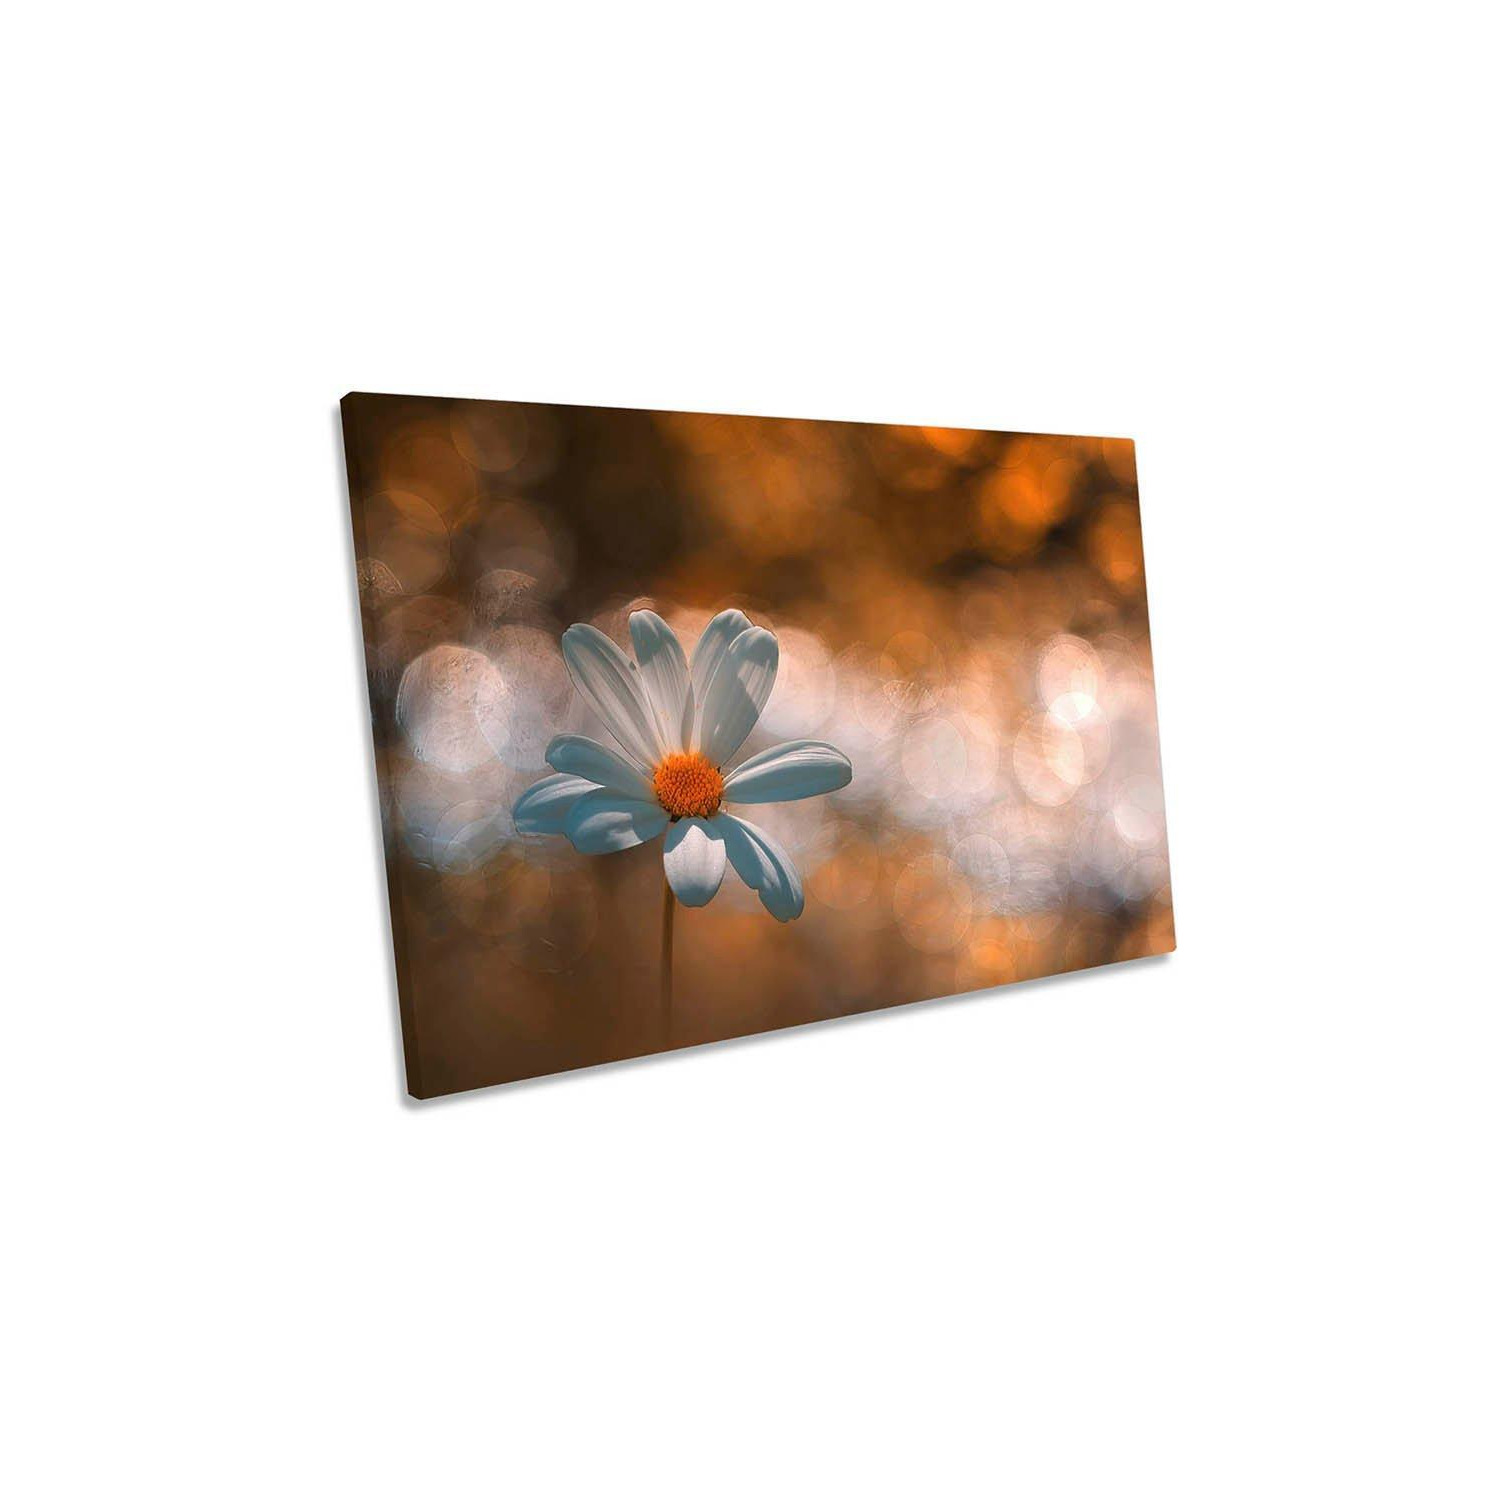 White Daisy Flower Floral Orange Background Canvas Wall Art Picture Print - image 1